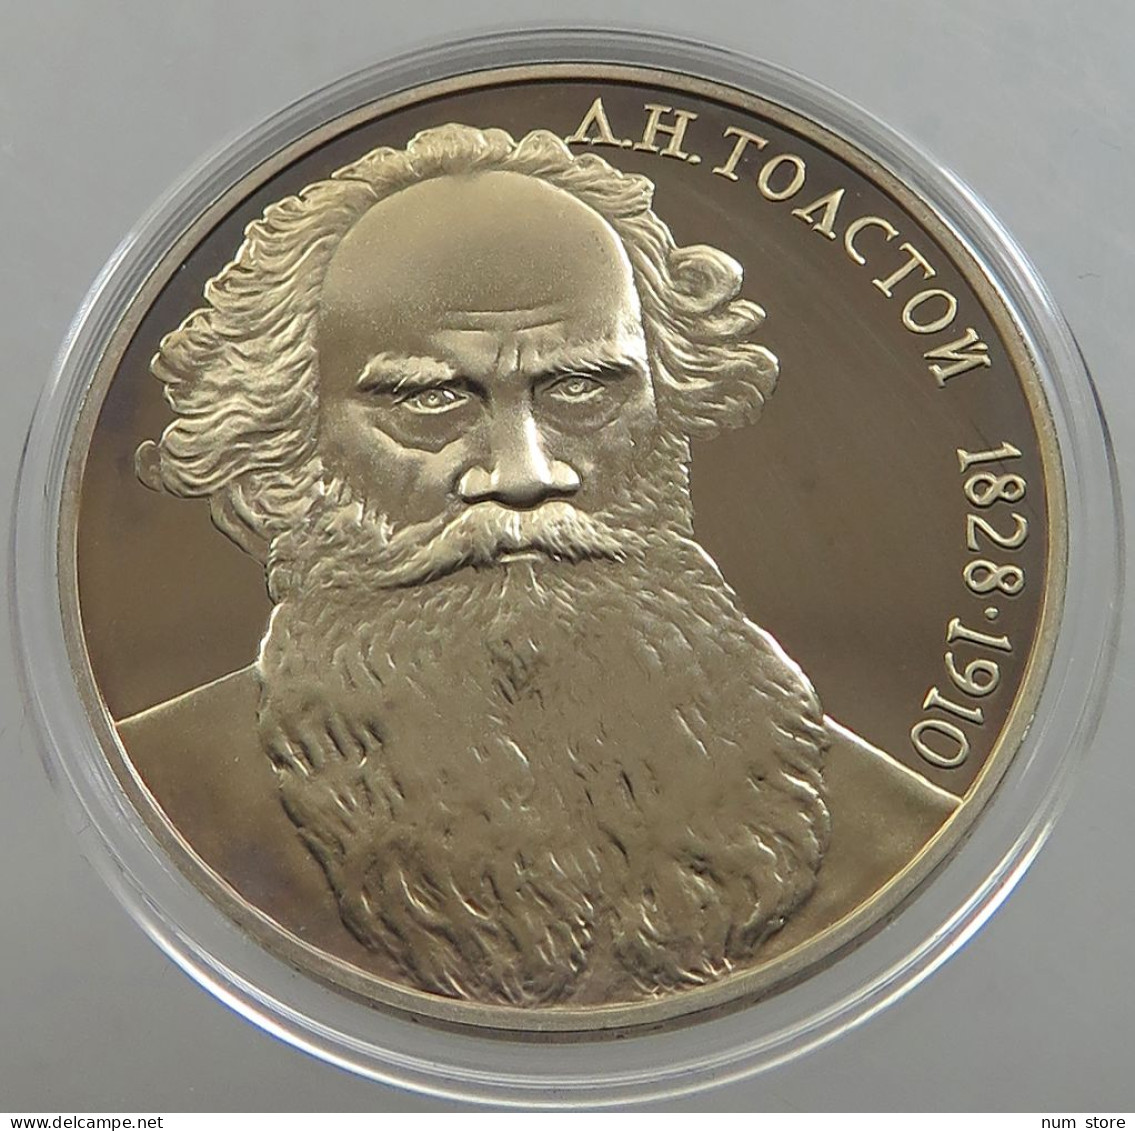 RUSSIA USSR 1 ROUBLE 1988 TOLSTOI #sm14 0523 - Rusland